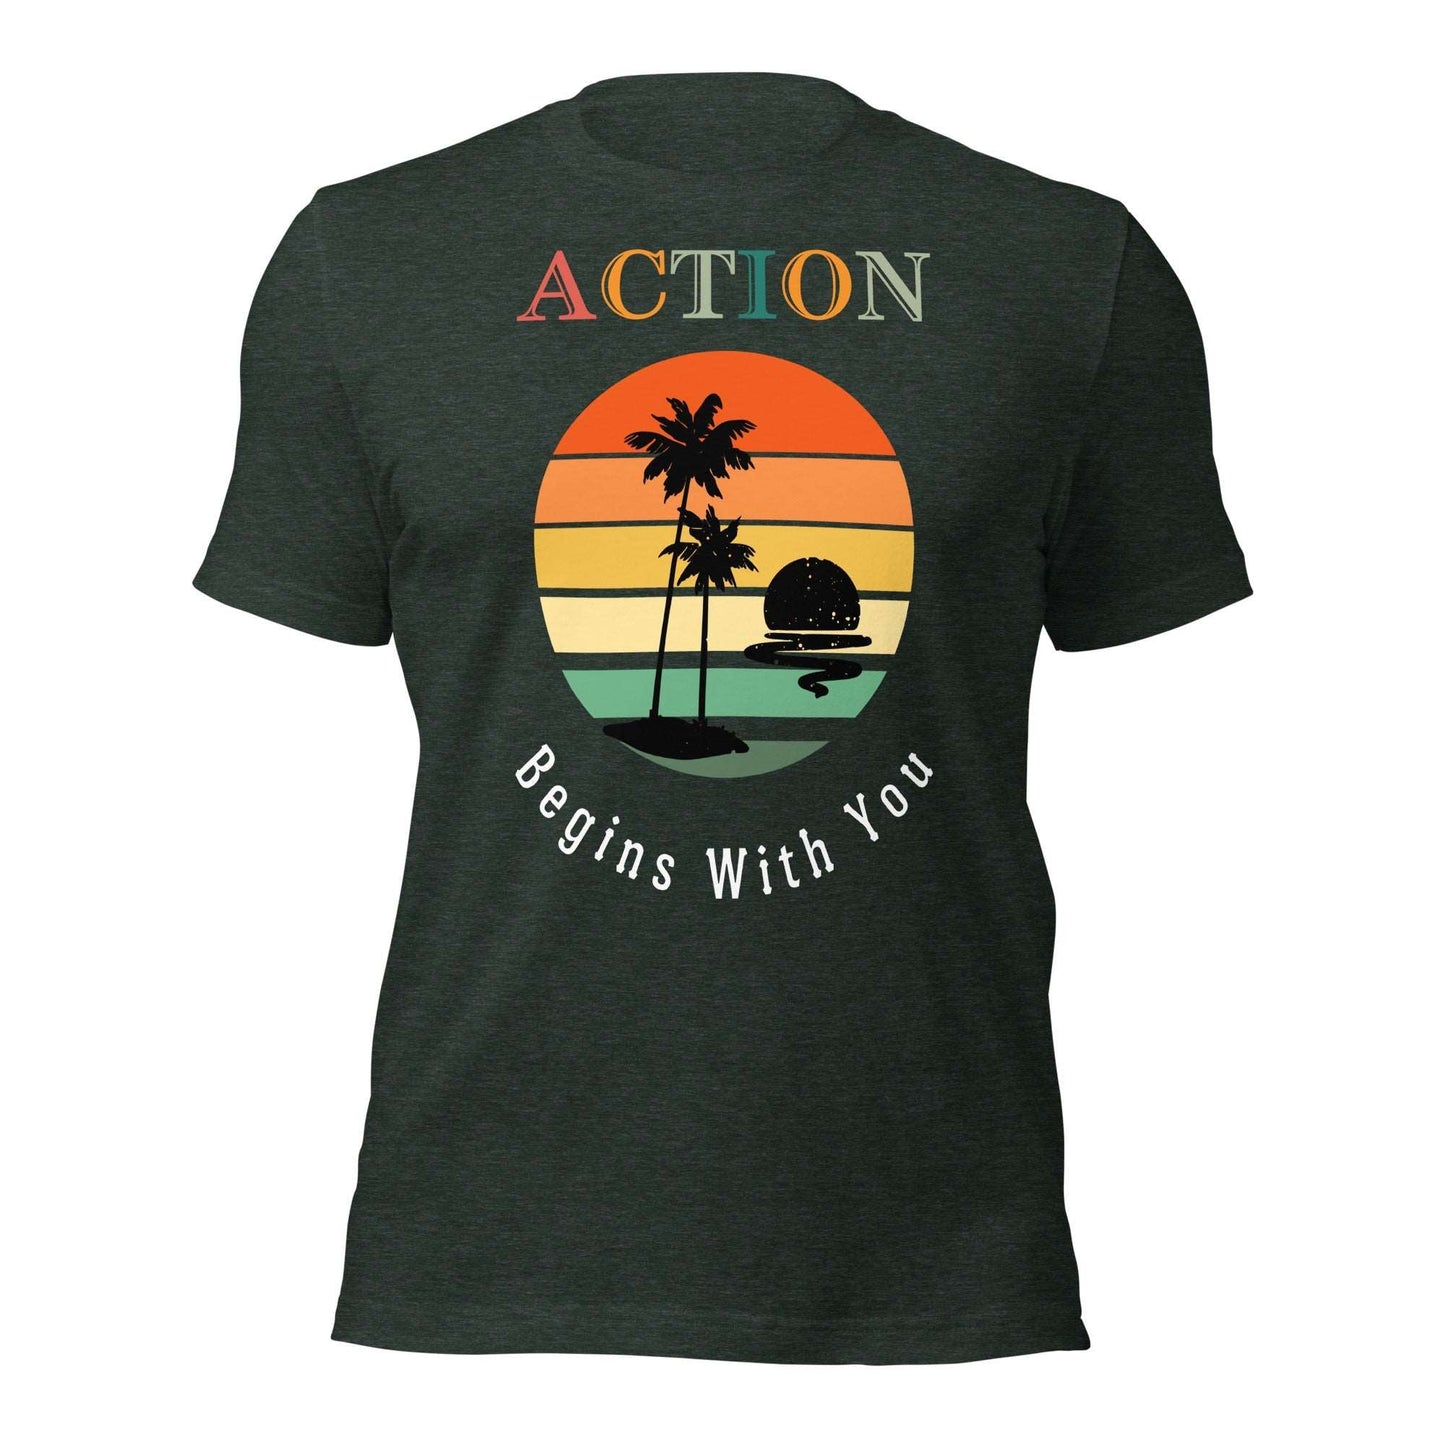 Action Begins With You Motivational T-Shirt - Motivational Wonders